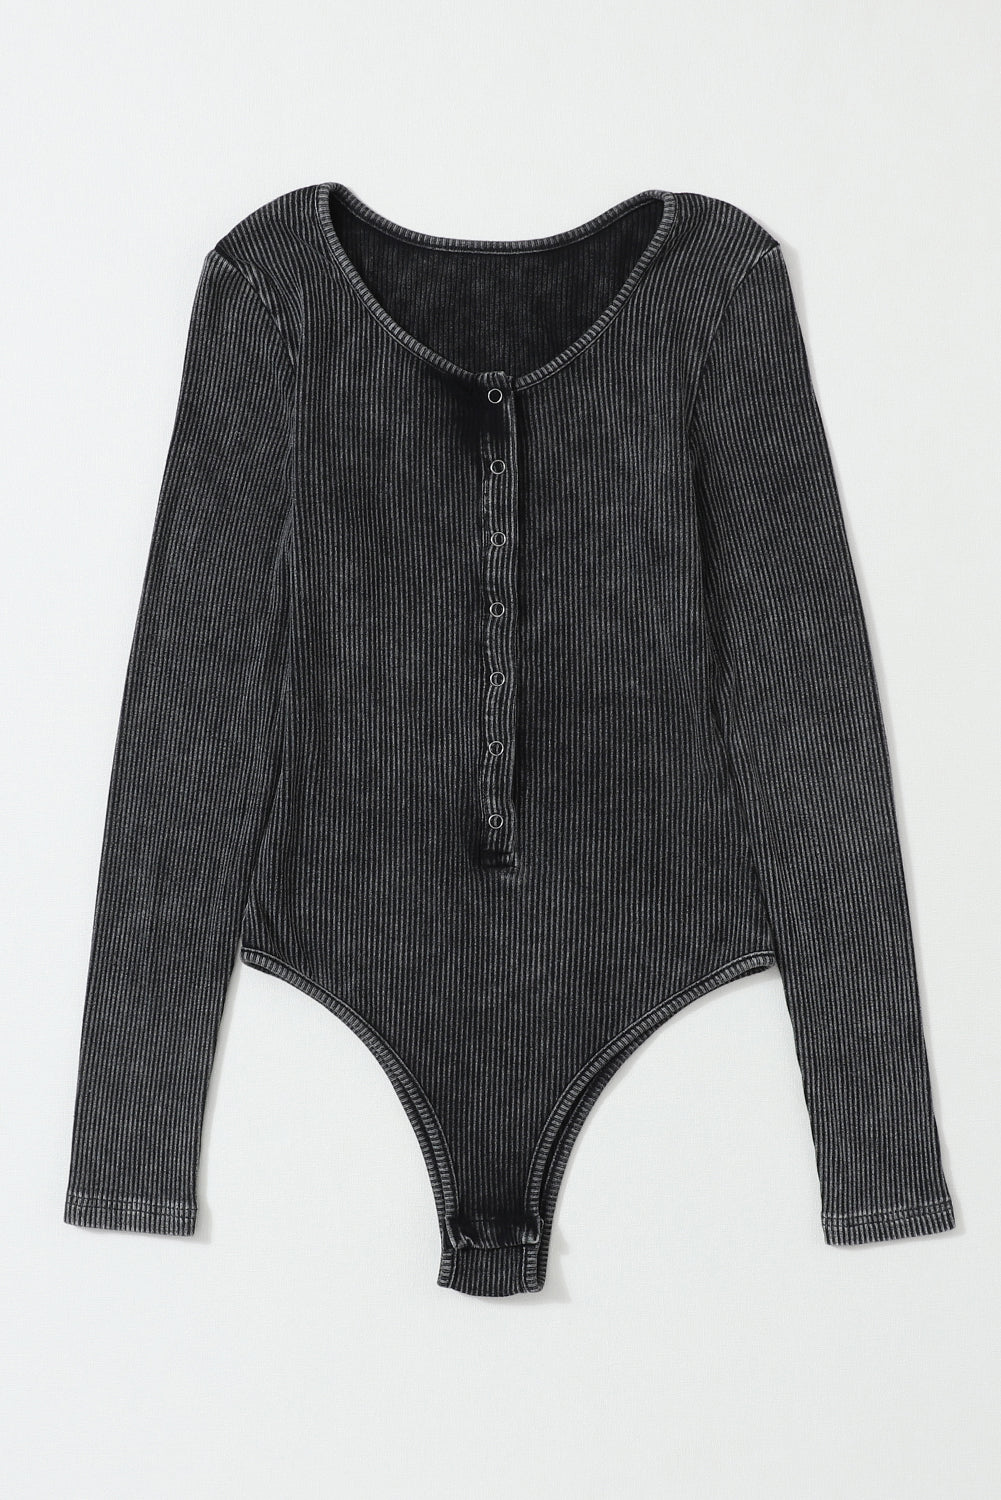 Black Mineral Wash Ribbed Snap Buttons Long Sleeve Bodysuit